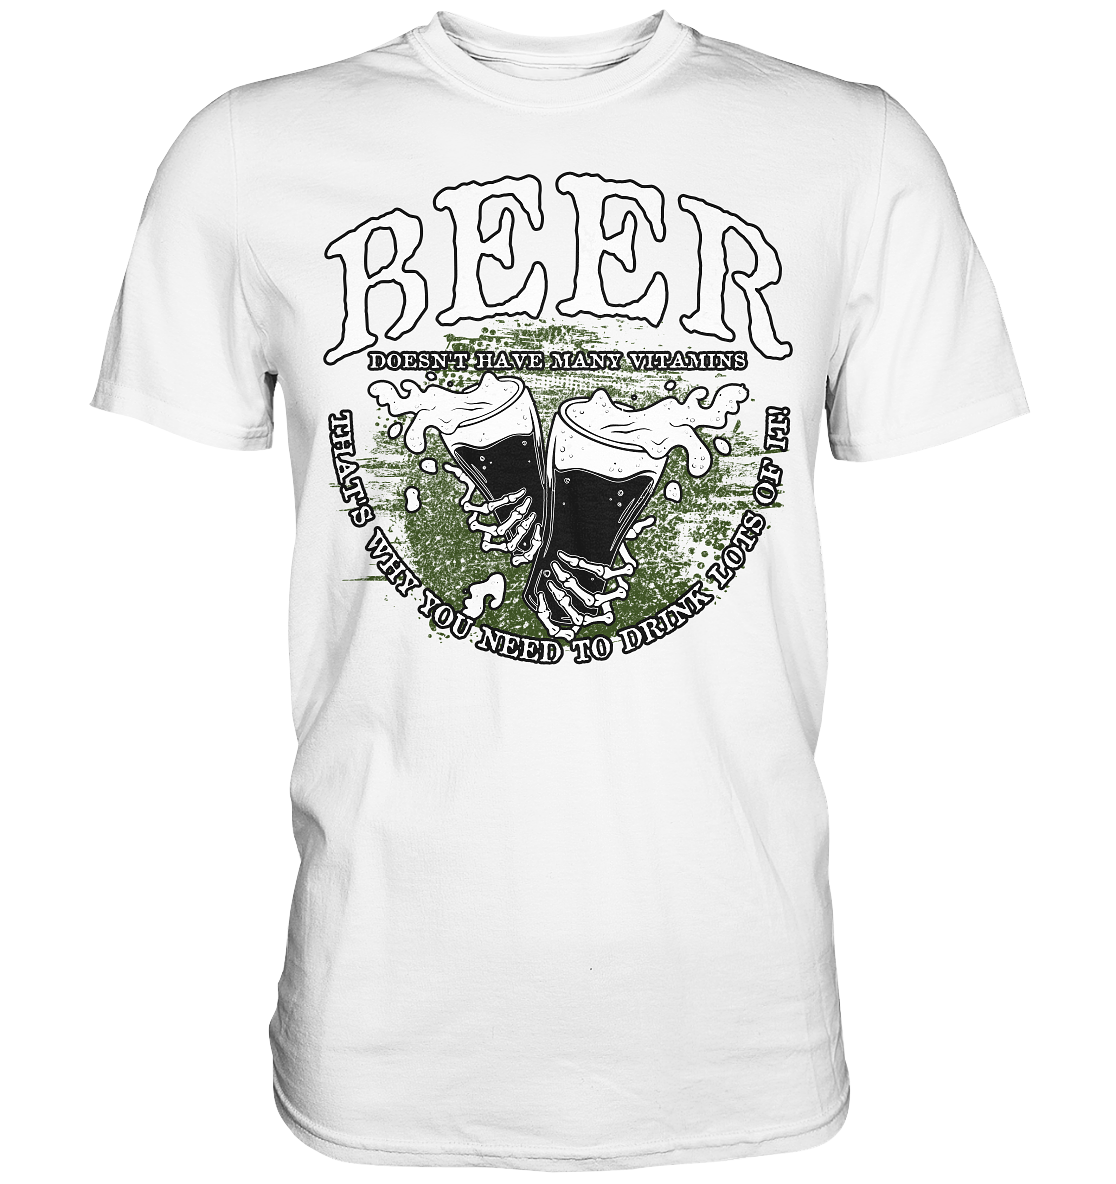 Beer "Doesn't Have Many Vitamins" - Premium Shirt